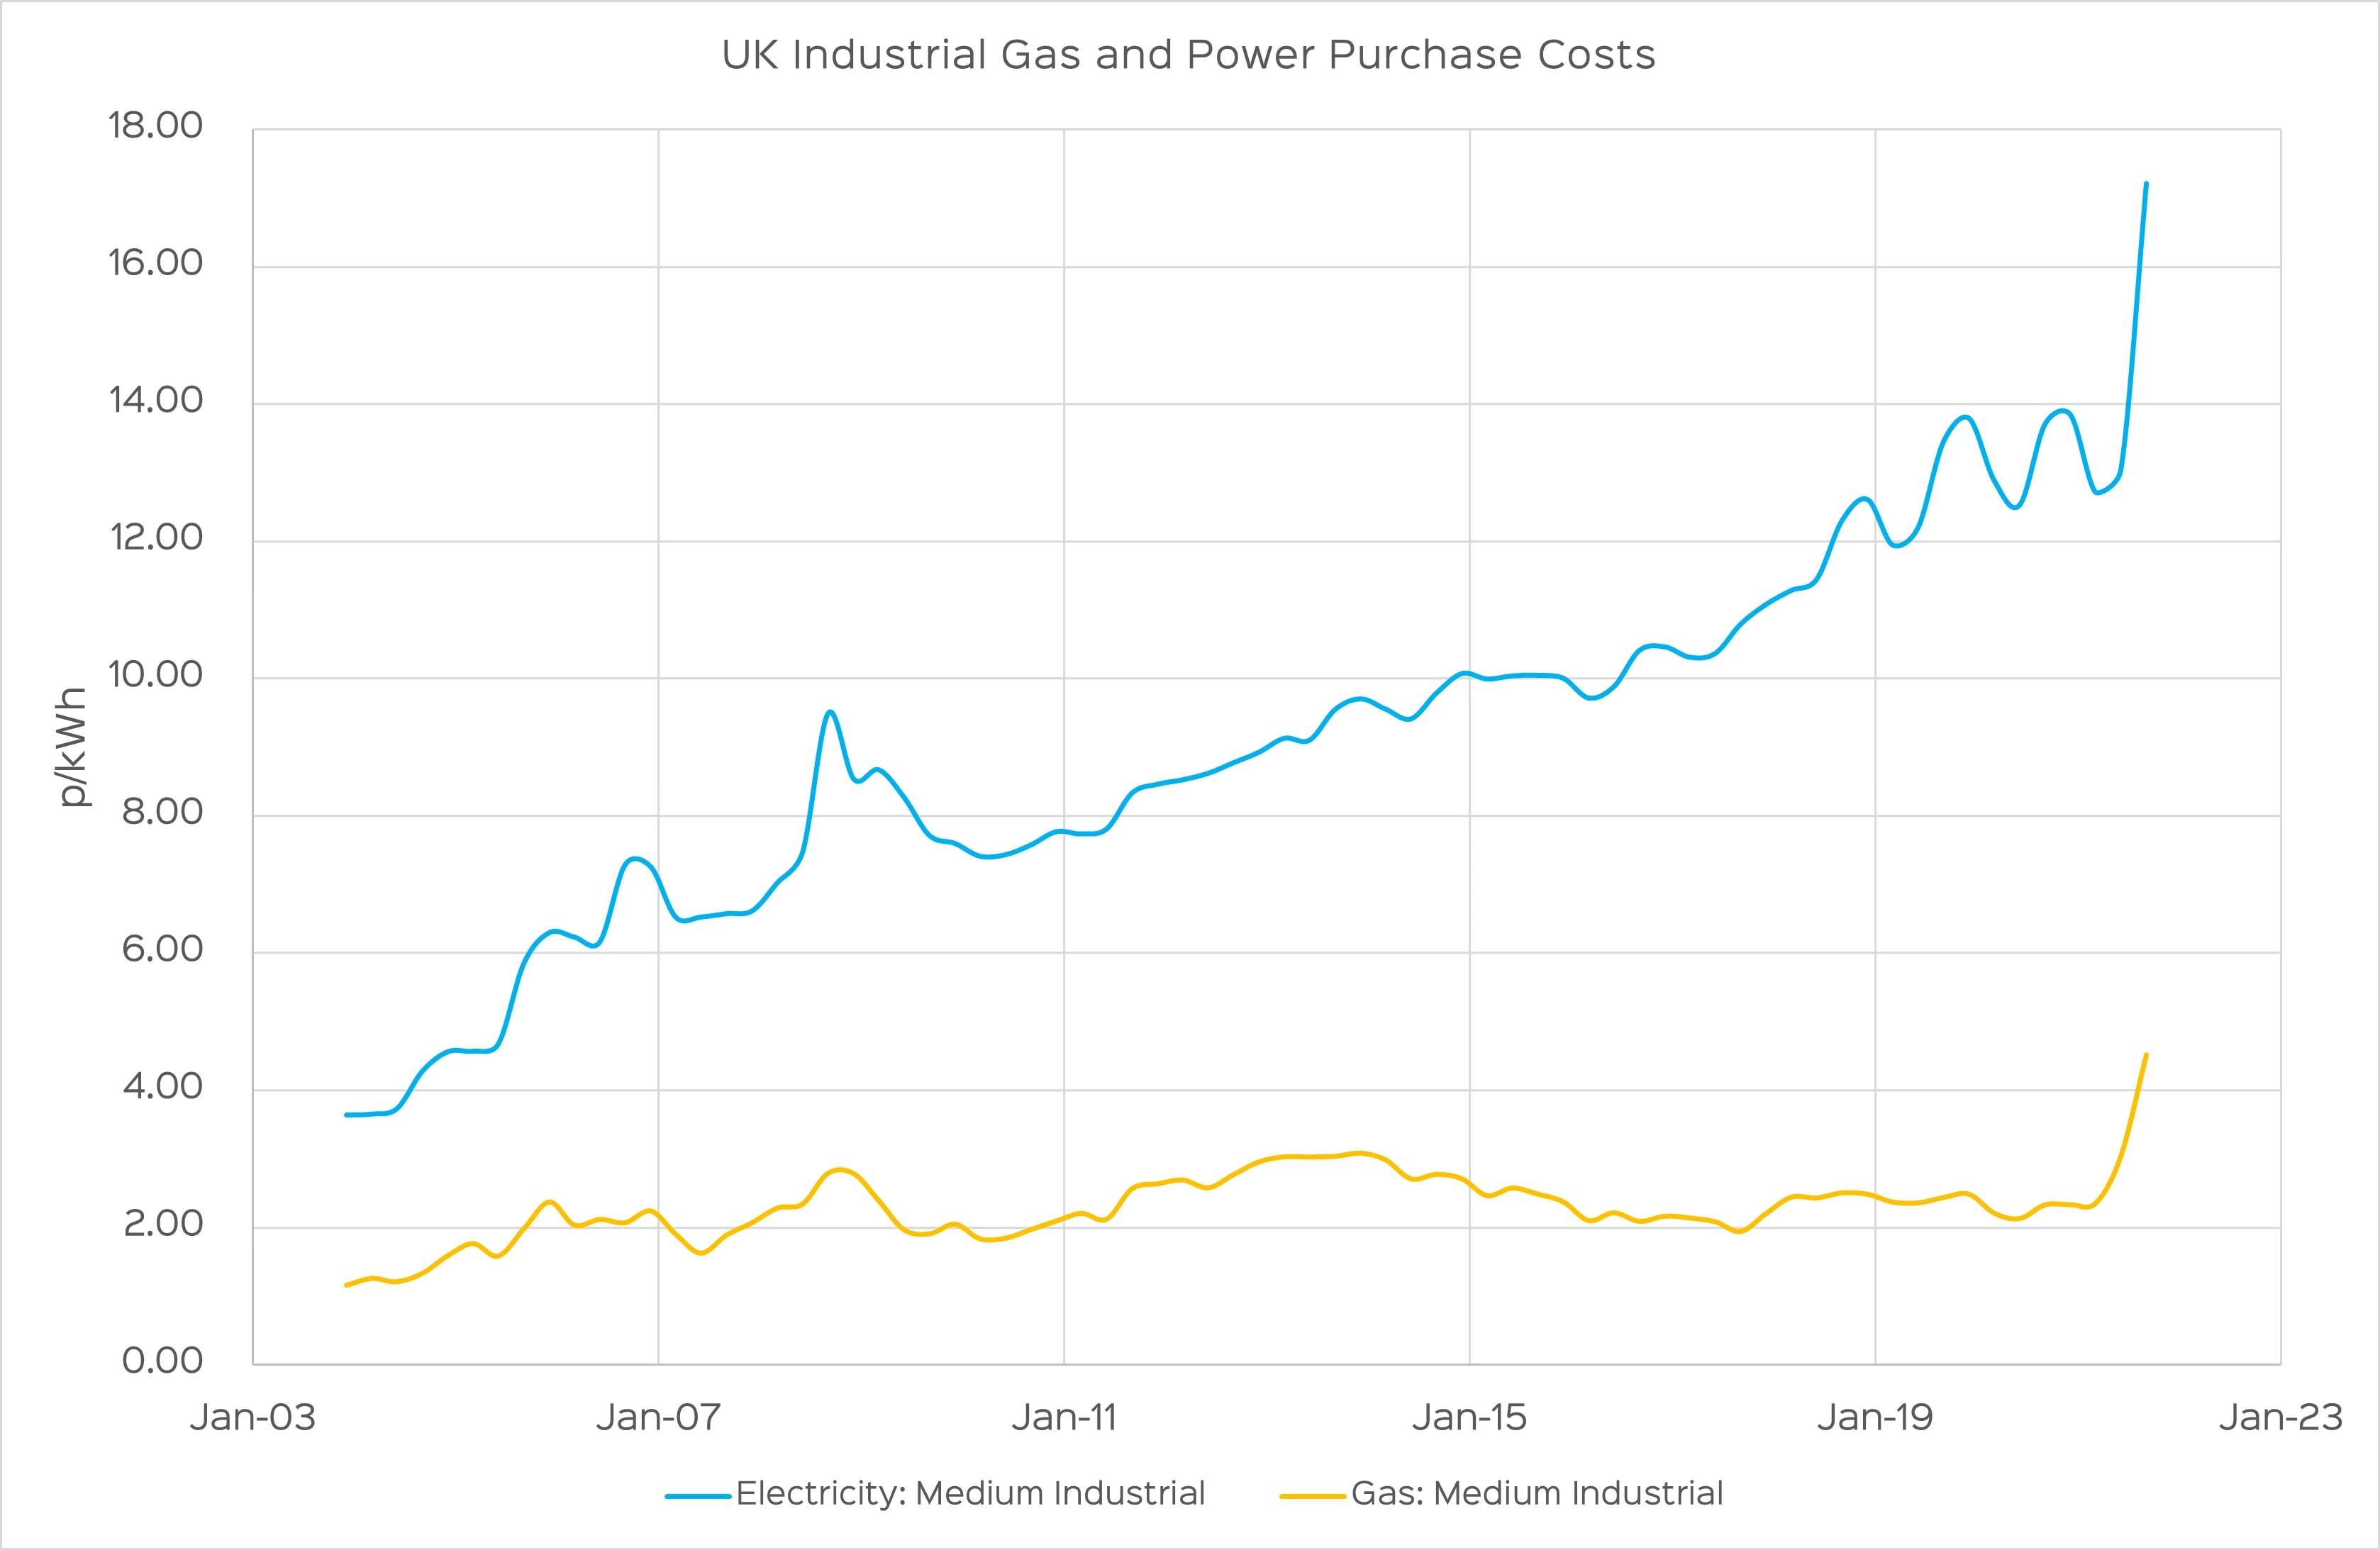 UK Industrial Gas and Power Purchase Costs